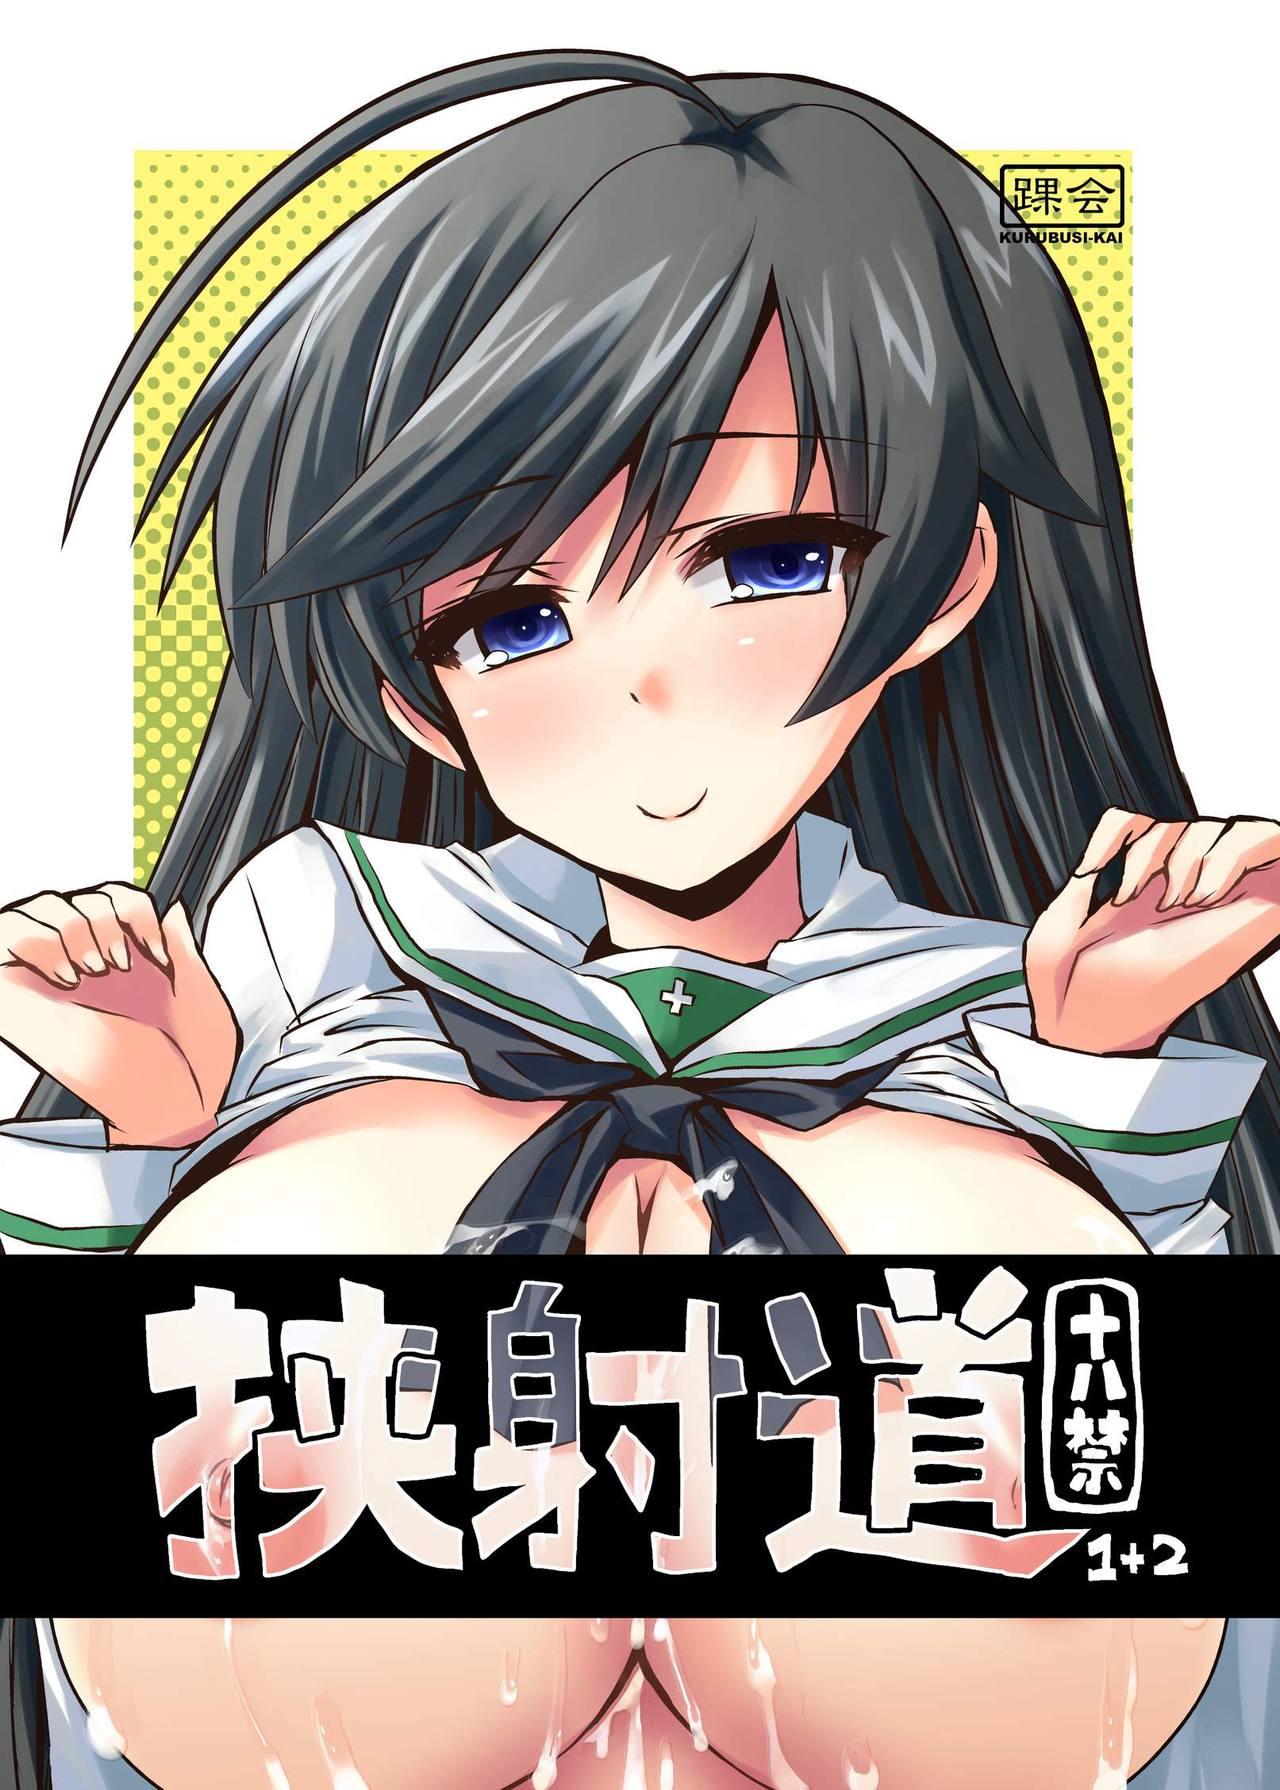 Uncensored Kyoushadou 1+2 - Girls und panzer Nude - Picture 1